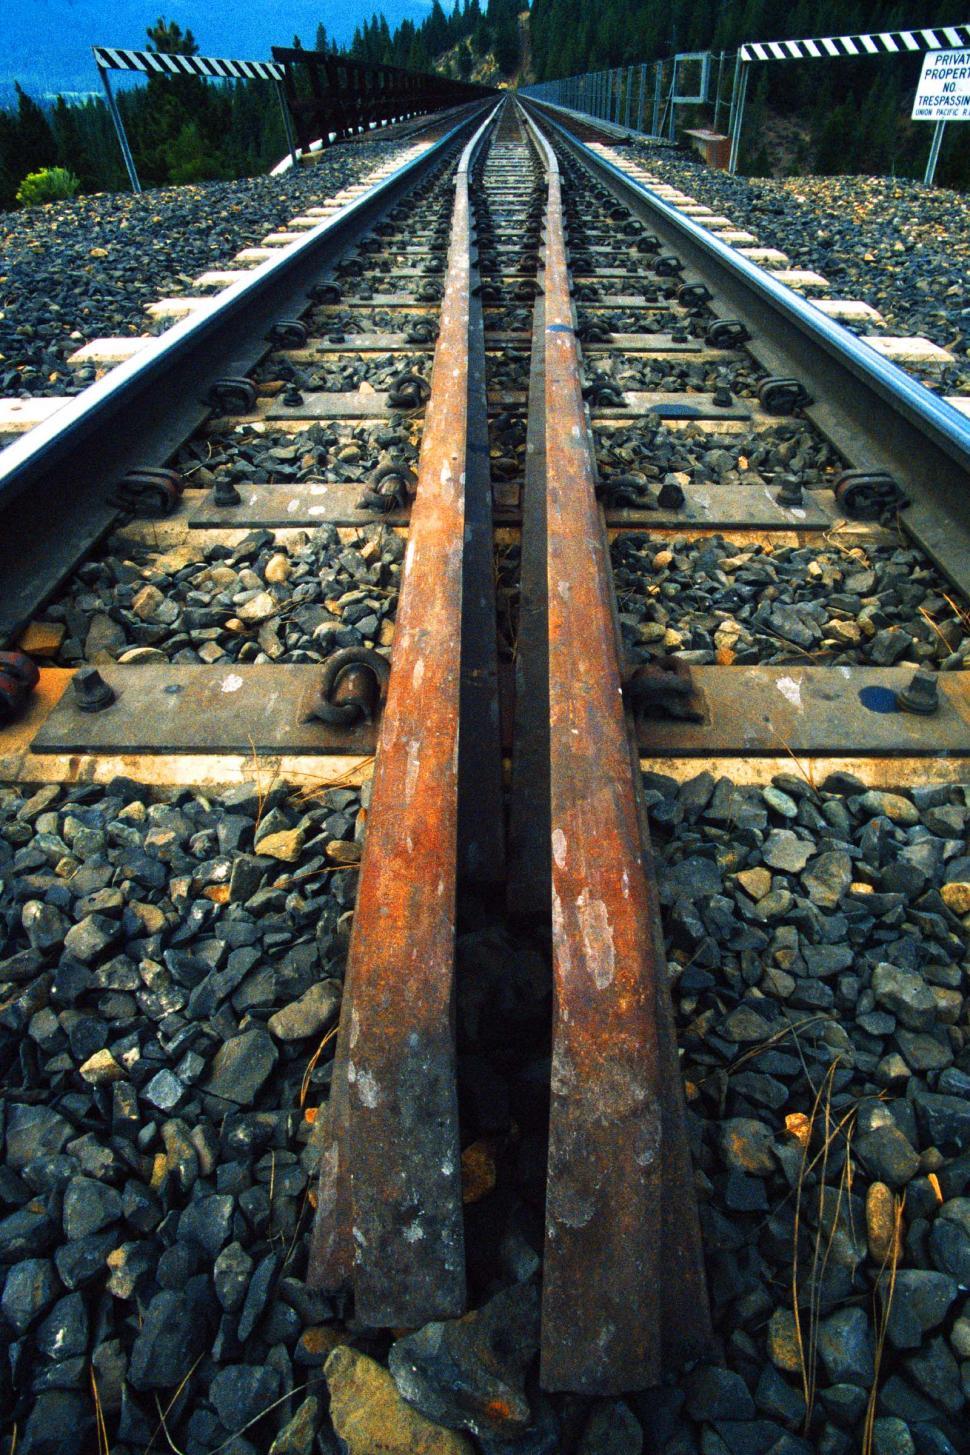 Free Image of Railway Railroad Track With Stones 